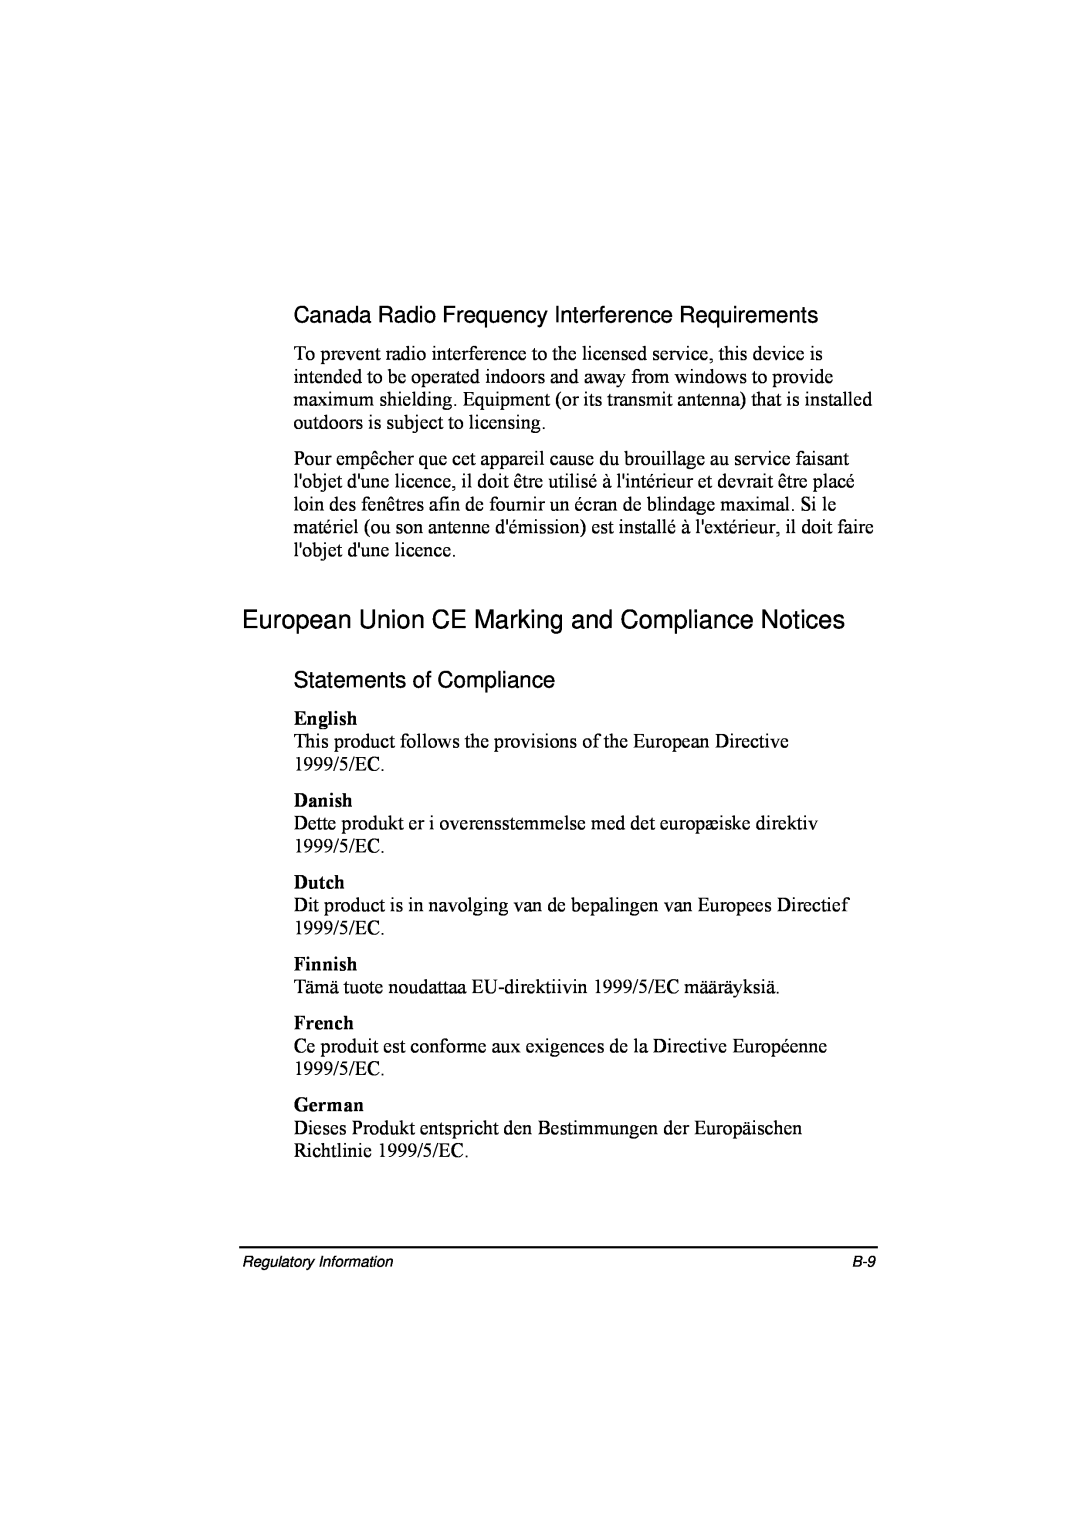 TAG 20 Series European Union CE Marking and Compliance Notices, Canada Radio Frequency Interference Requirements, English 